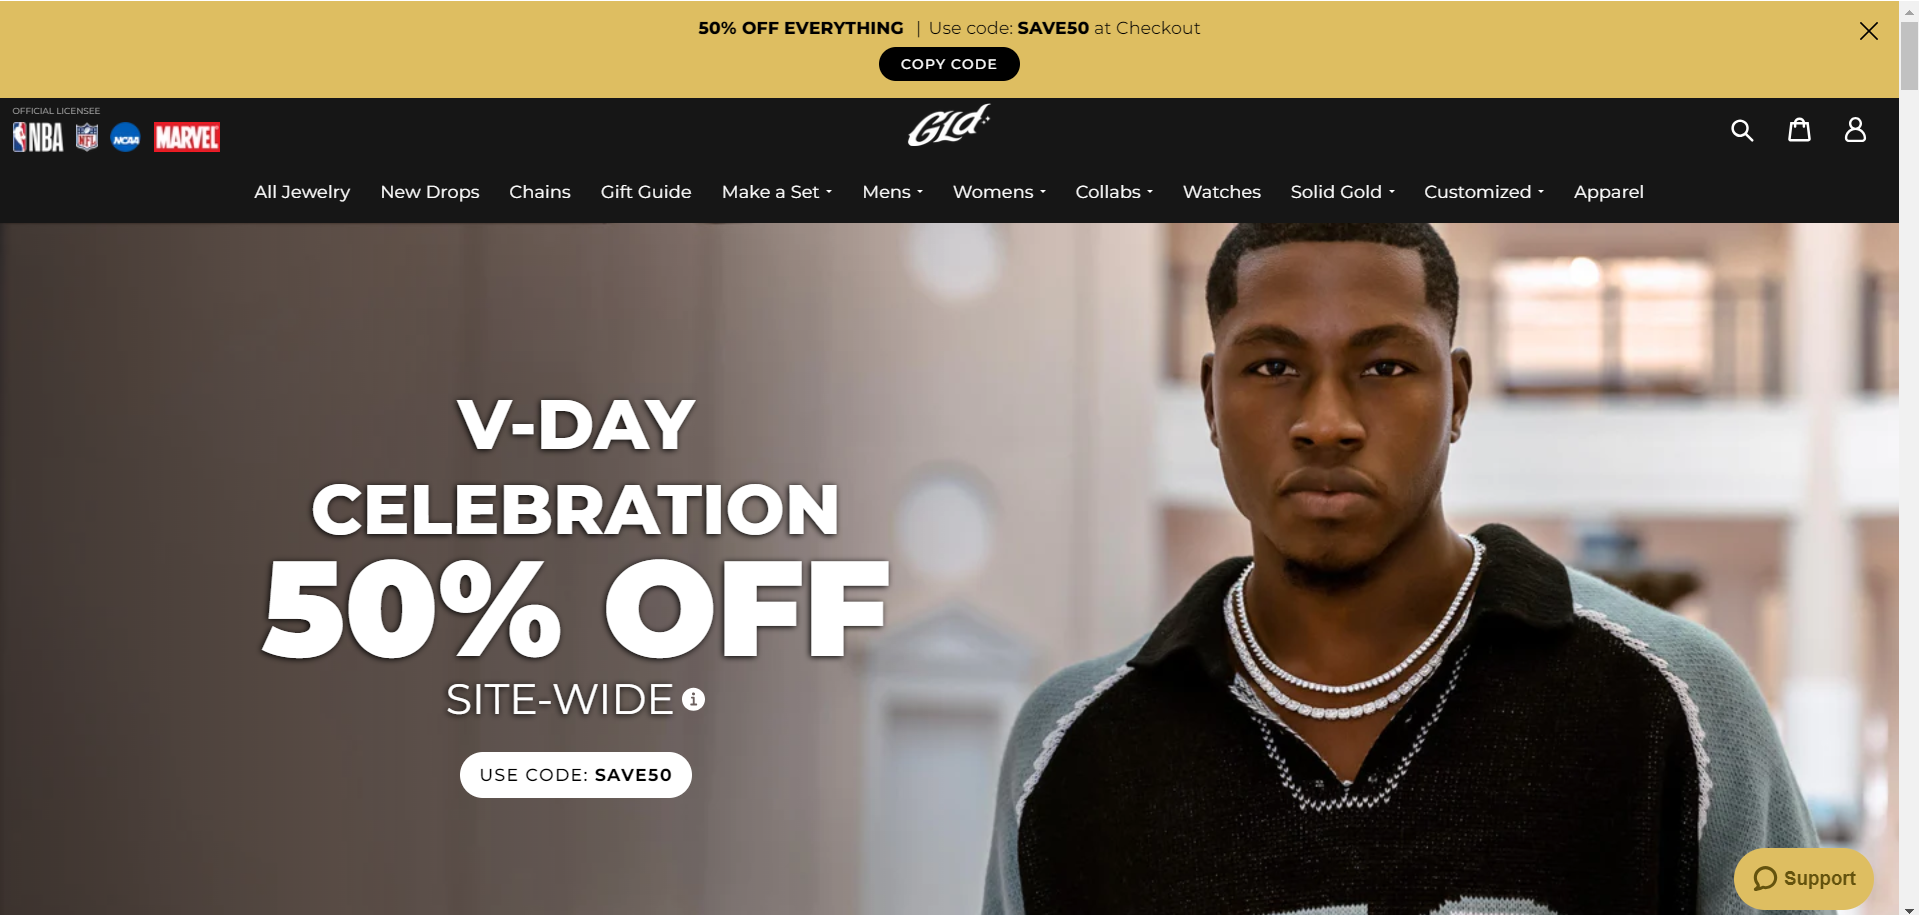 An Image of the GLD Shop Website